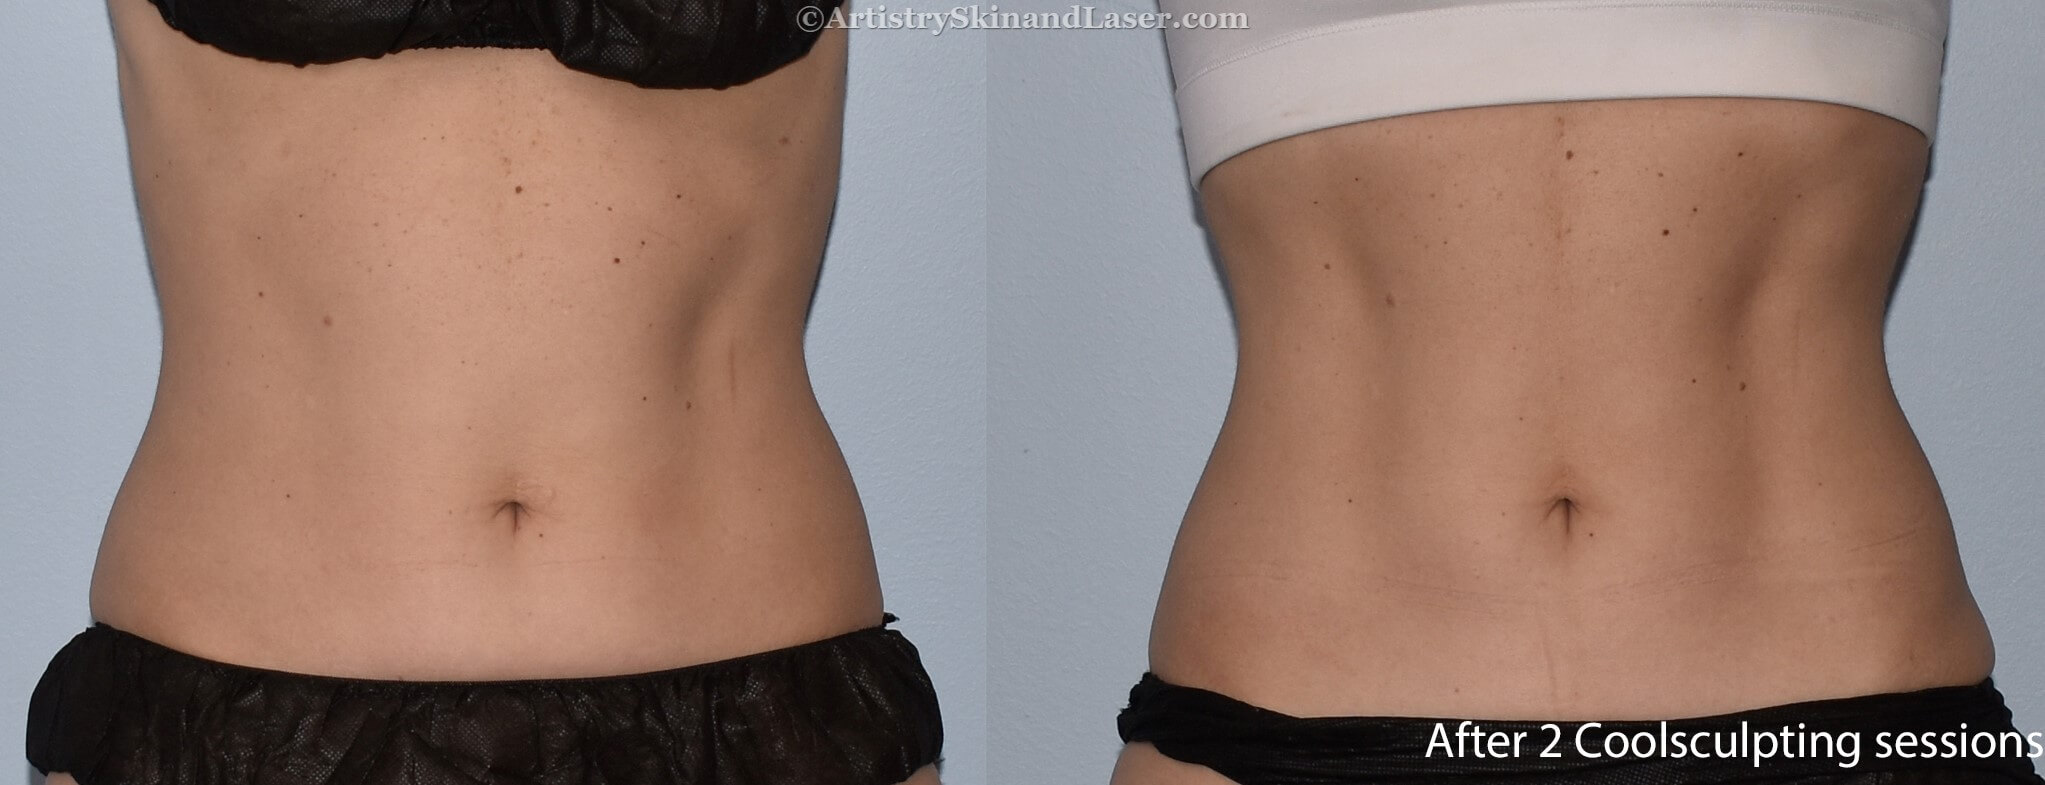 Woman's before and after Coolsculpting abdomen treatment at Artistry Skin & Laser.